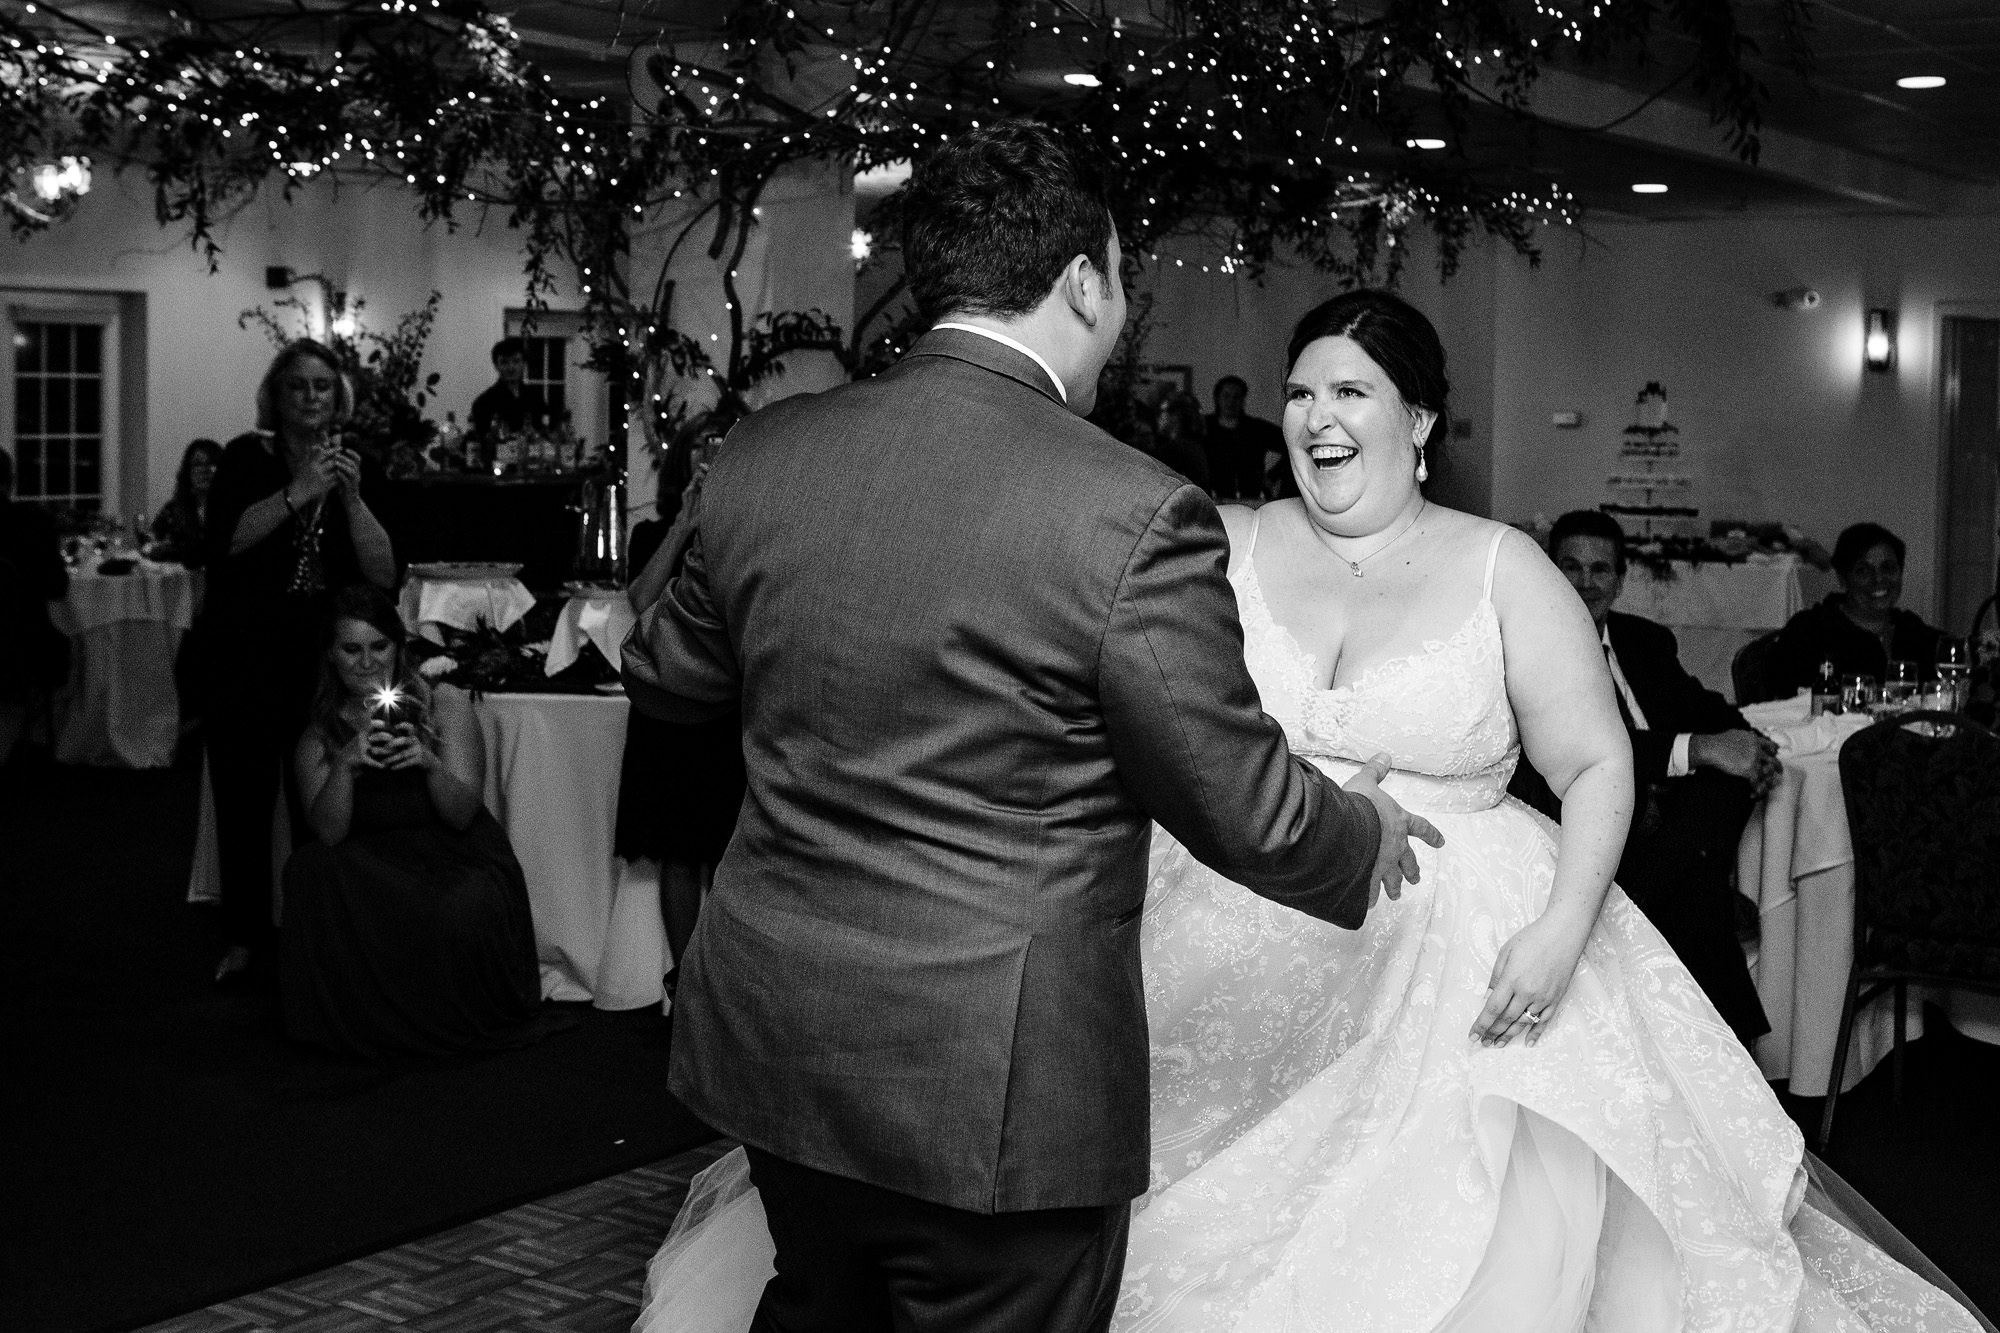 The bride and groom dance at their Freeport Maine wedding